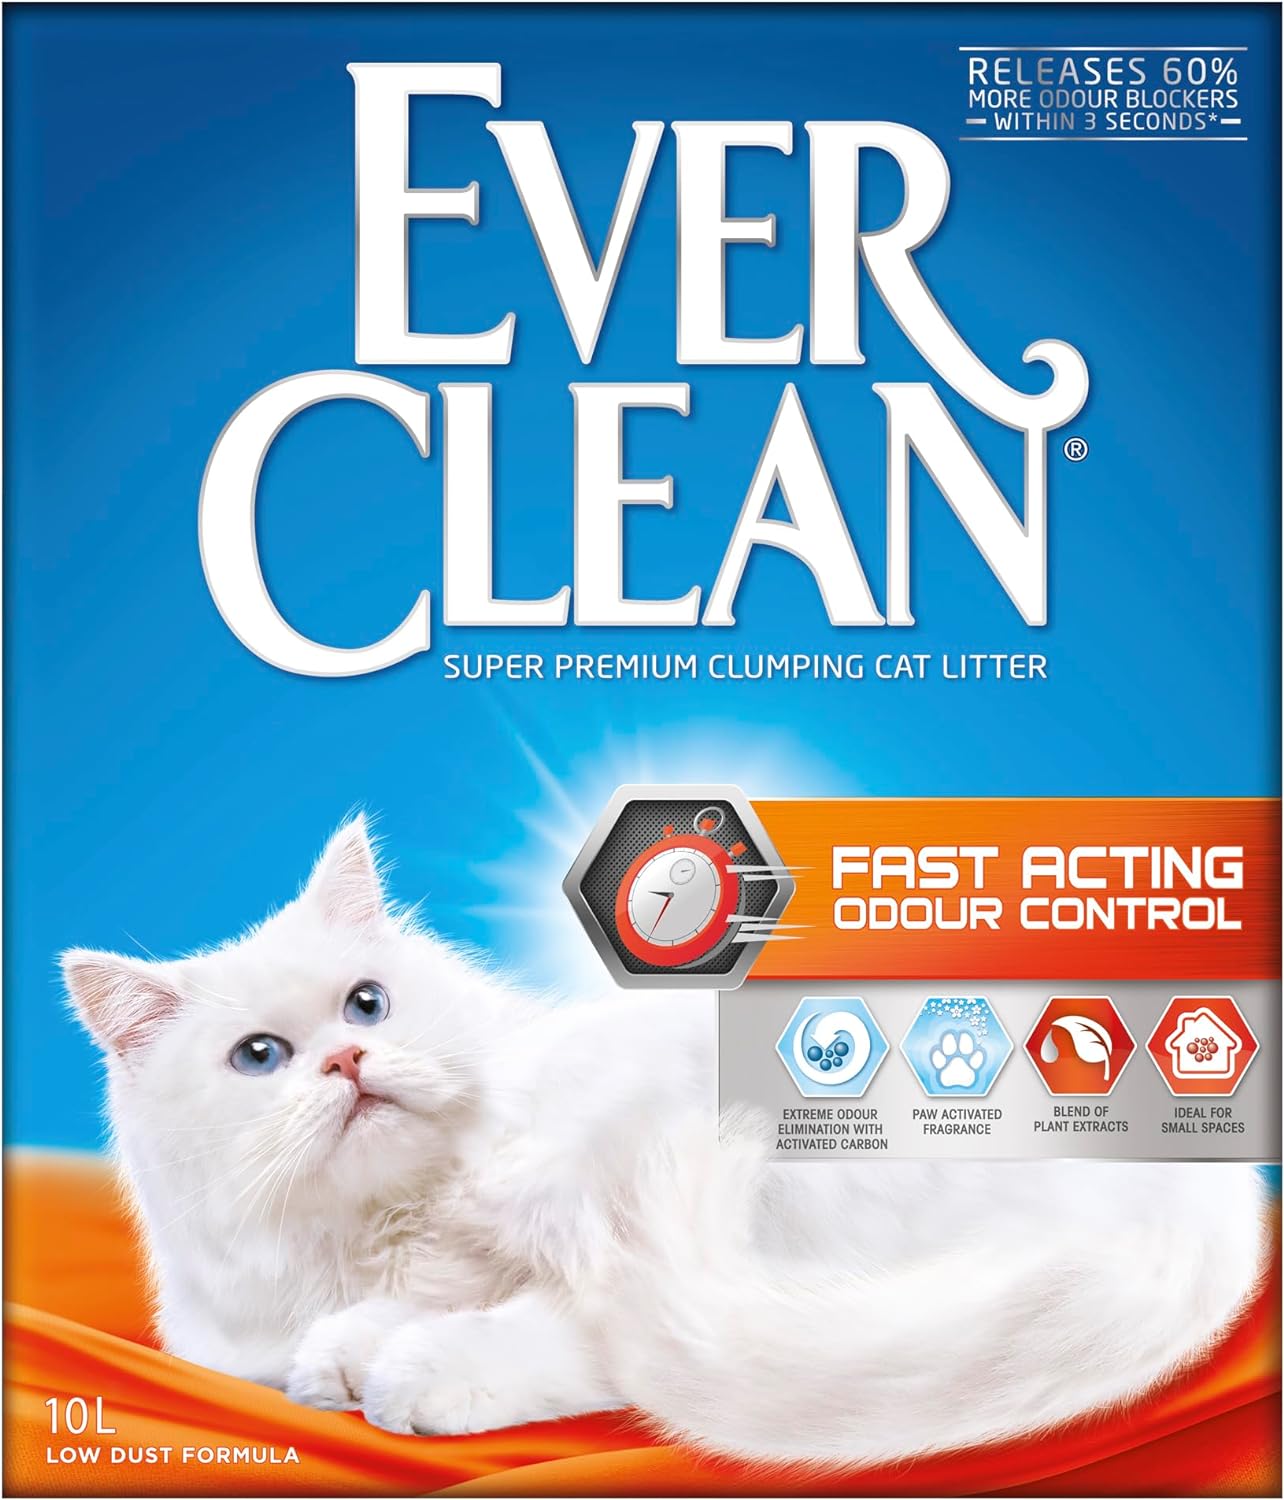 Ever Clean Clumping Cat Litter, Fast Acting Odour Control, Ideal for small spaces, Scented for long-lasting freshness, 10L?123436